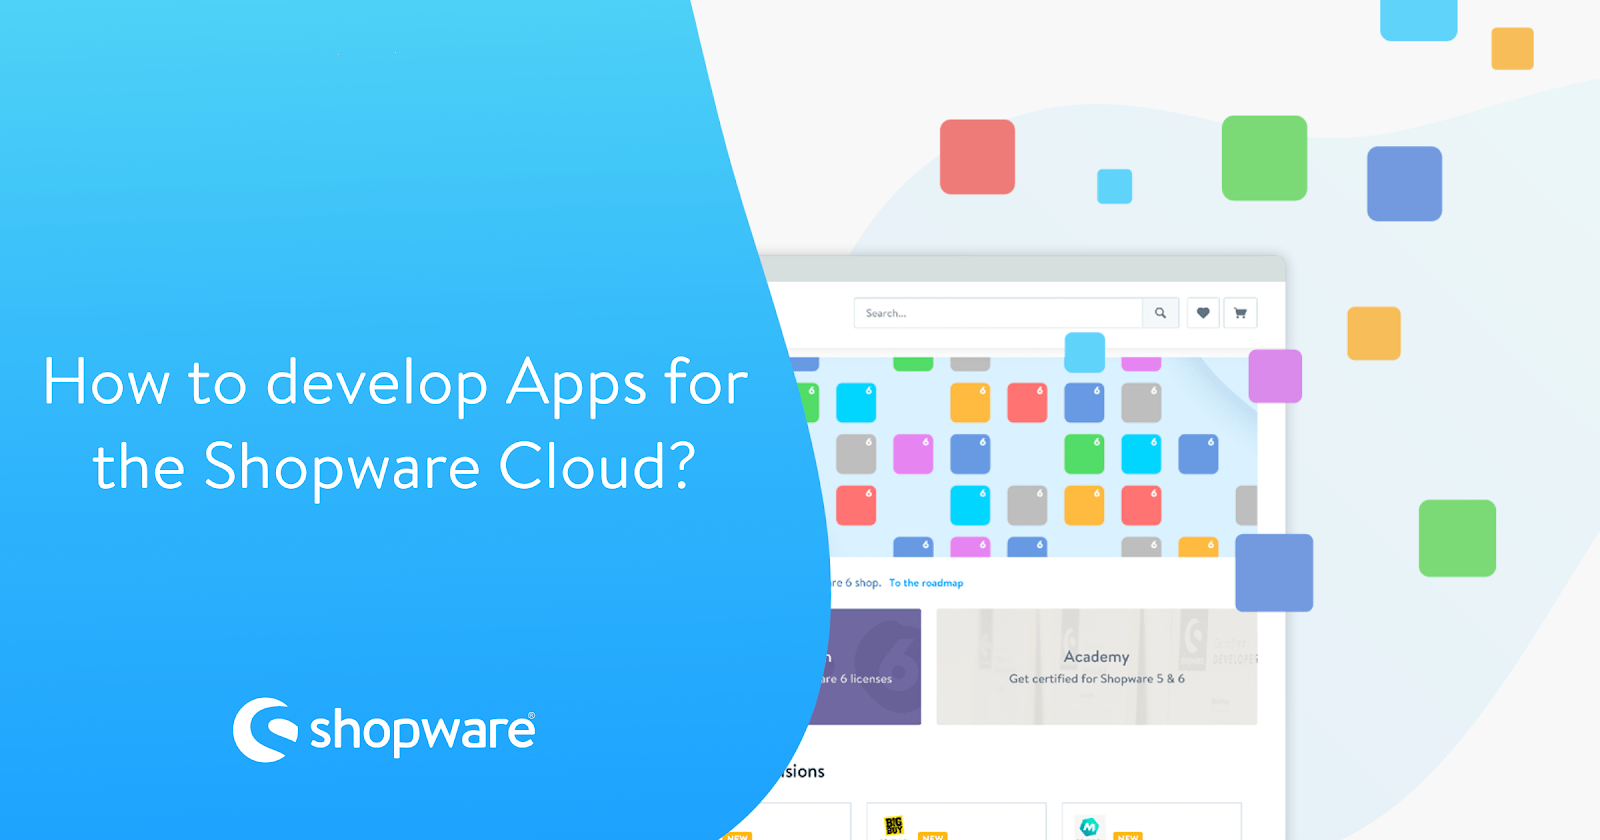 How to develop apps for the Shopware Cloud